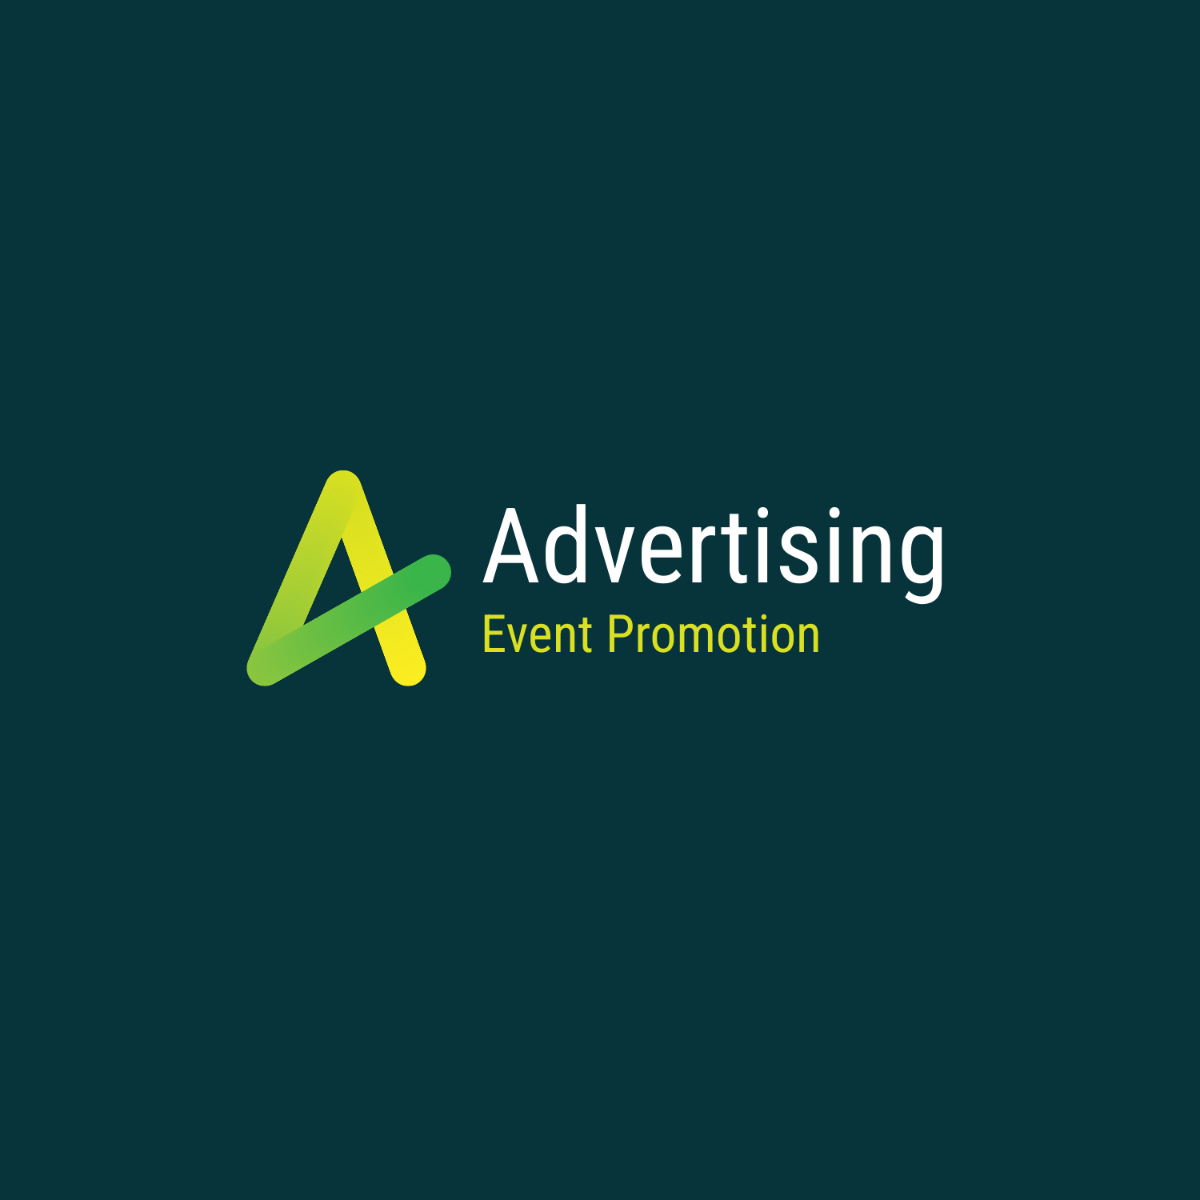 Advertising Event Promotion Logo Template